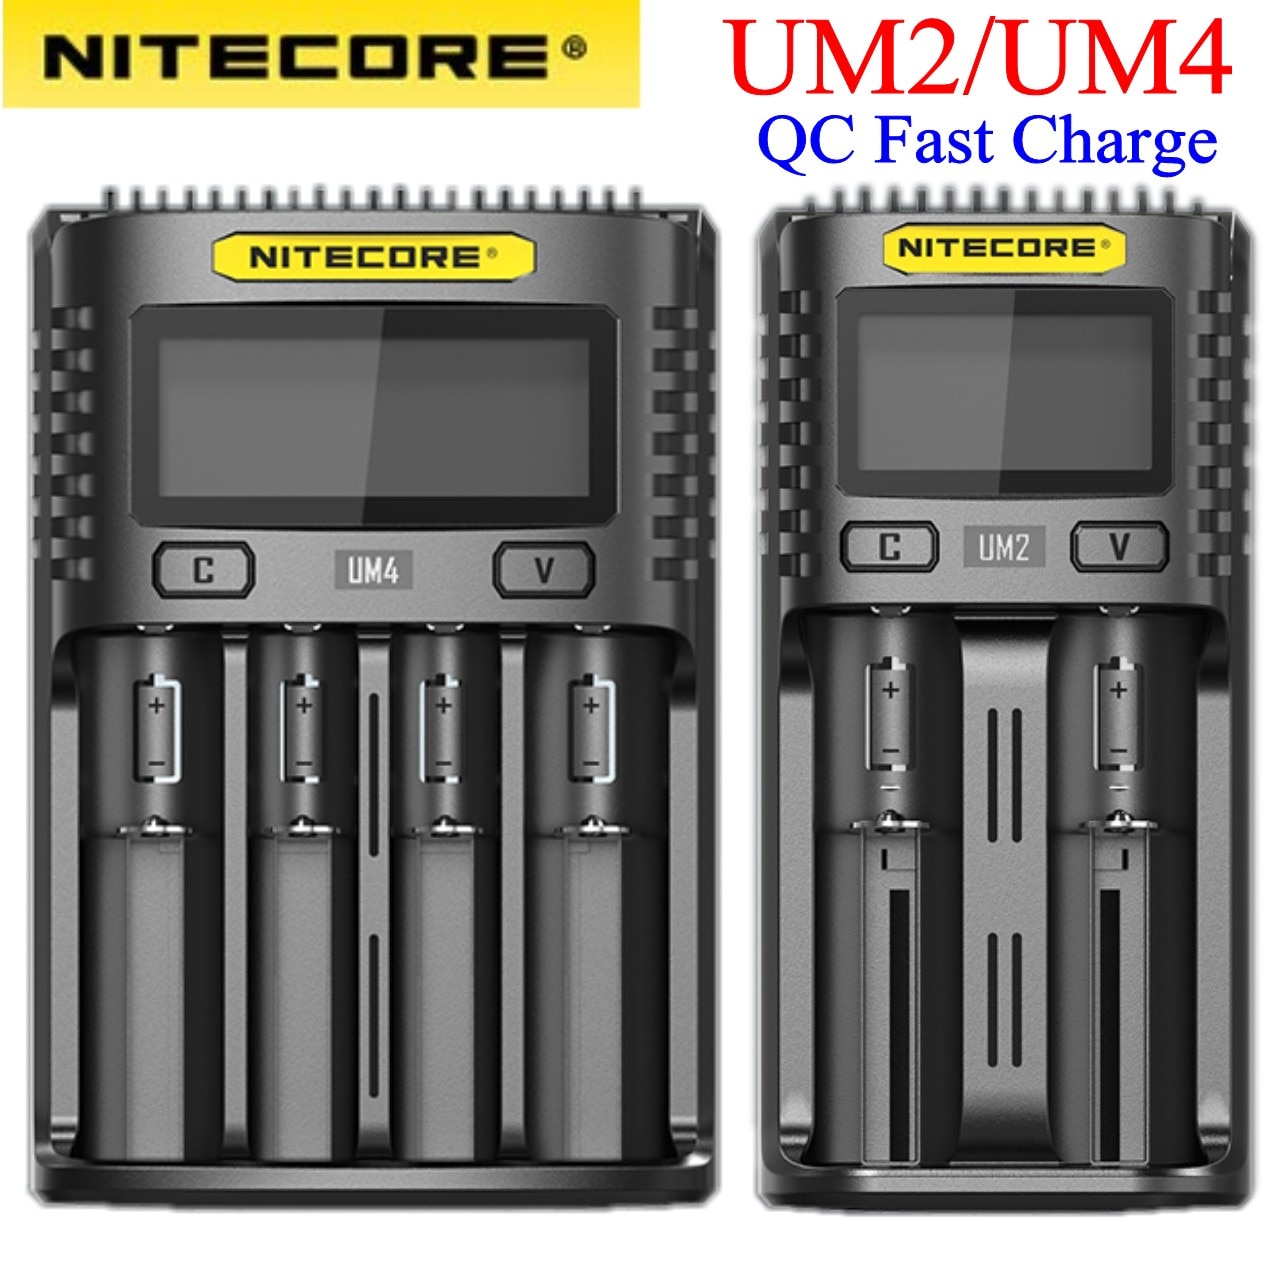 NITECORE UM4 UM2 C4 VC4 LCD Smart Battery Charger for Li ion/IMR/INR/ICR/LiFePO4 18650 14500 26650 AA 3.7 1.2V 1.5V Batteries D4|Chargers| - AliExpress